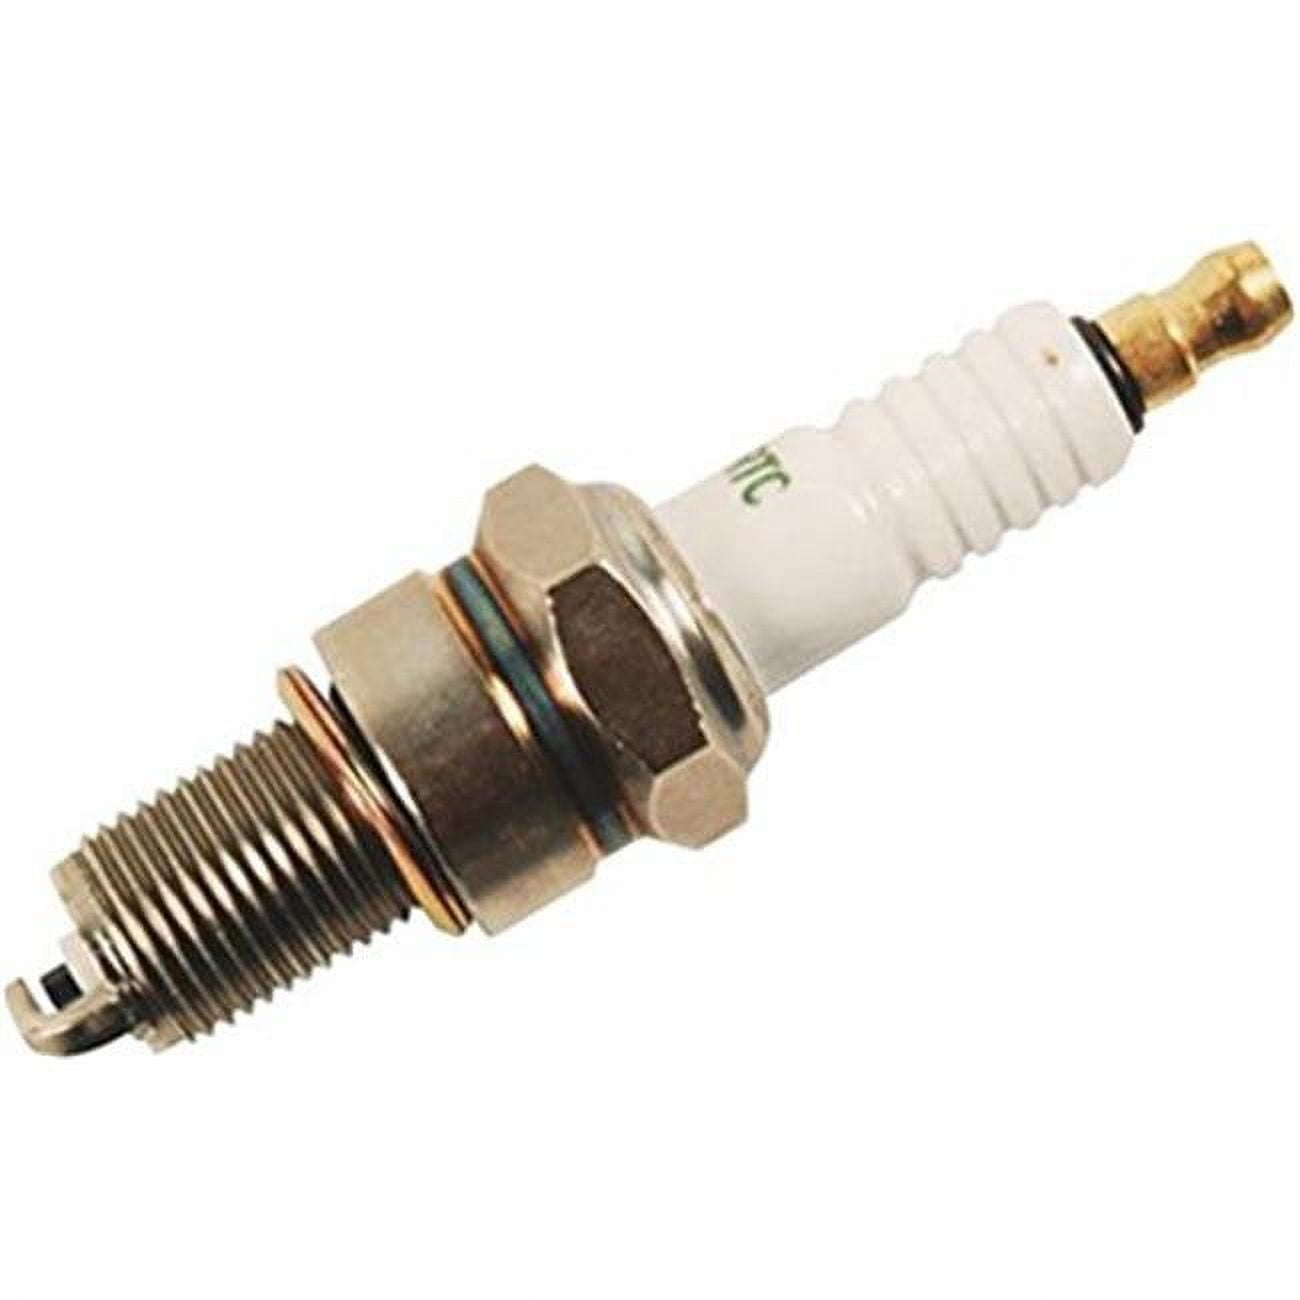 Picture of Arnold 490-250-M014 Powermore Spark Plug - Fits RL95YC